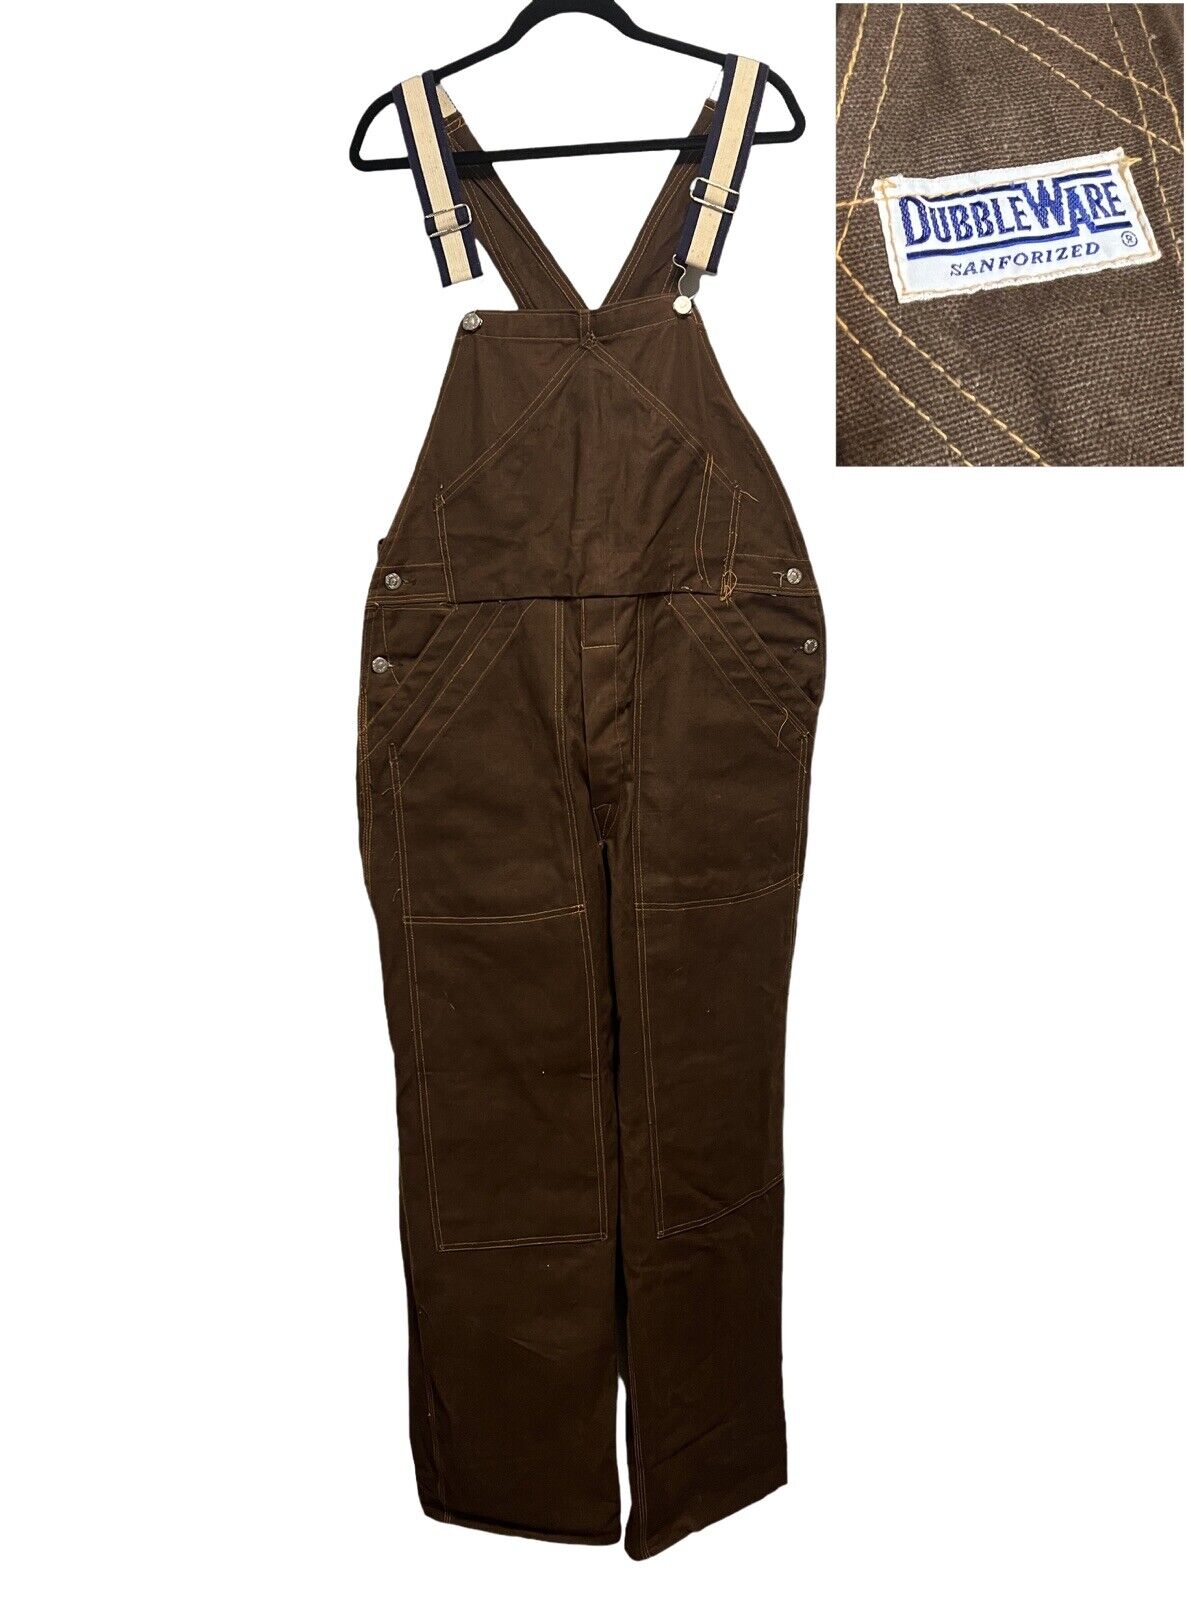 Vintage DUBBLEWARE Double Front Overalls 40s 50s Early Workwear